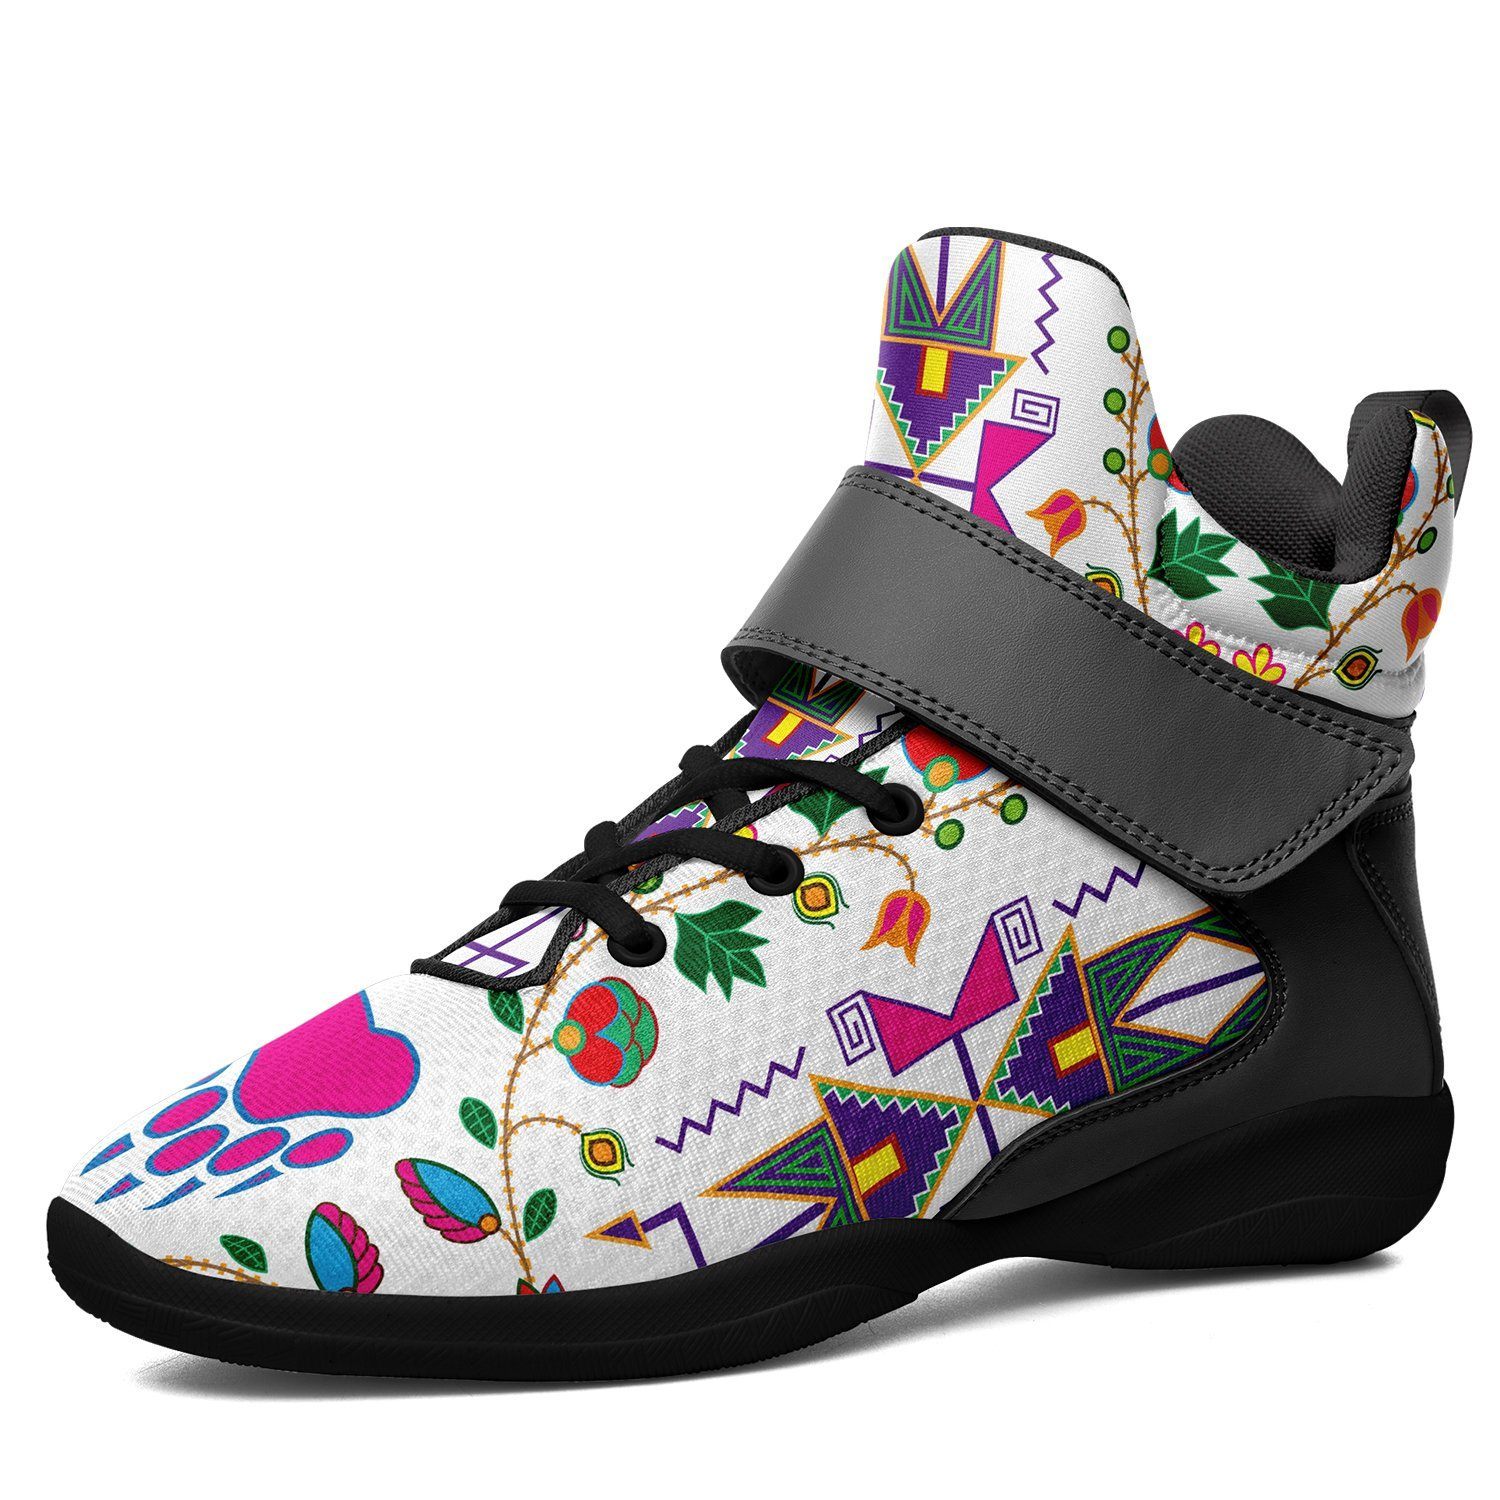 Geometric Floral Fall White Kid's Ipottaa Basketball / Sport High Top Shoes 49 Dzine US Women 4.5 / US Youth 3.5 / EUR 35 Black Sole with Gray Strap 